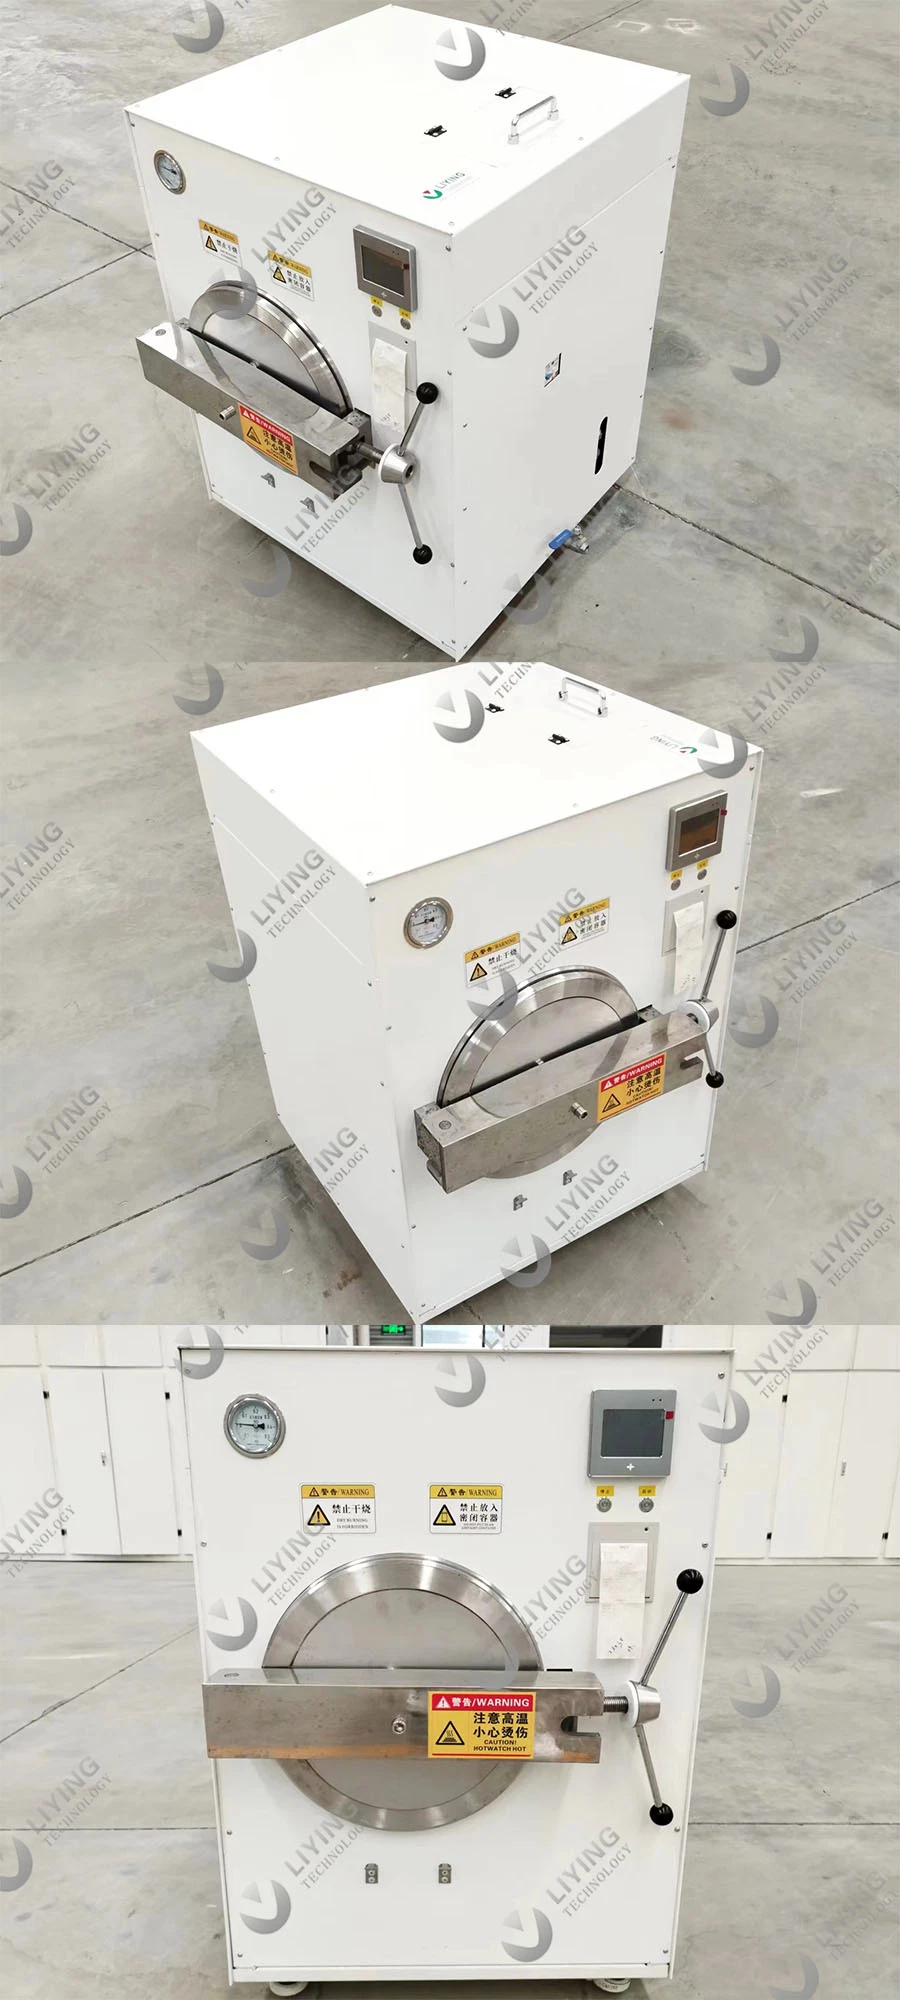 Small Scale Medical Waste Disposal Equipment Hazardous Waste Microwave and High Pressure Sterilizer